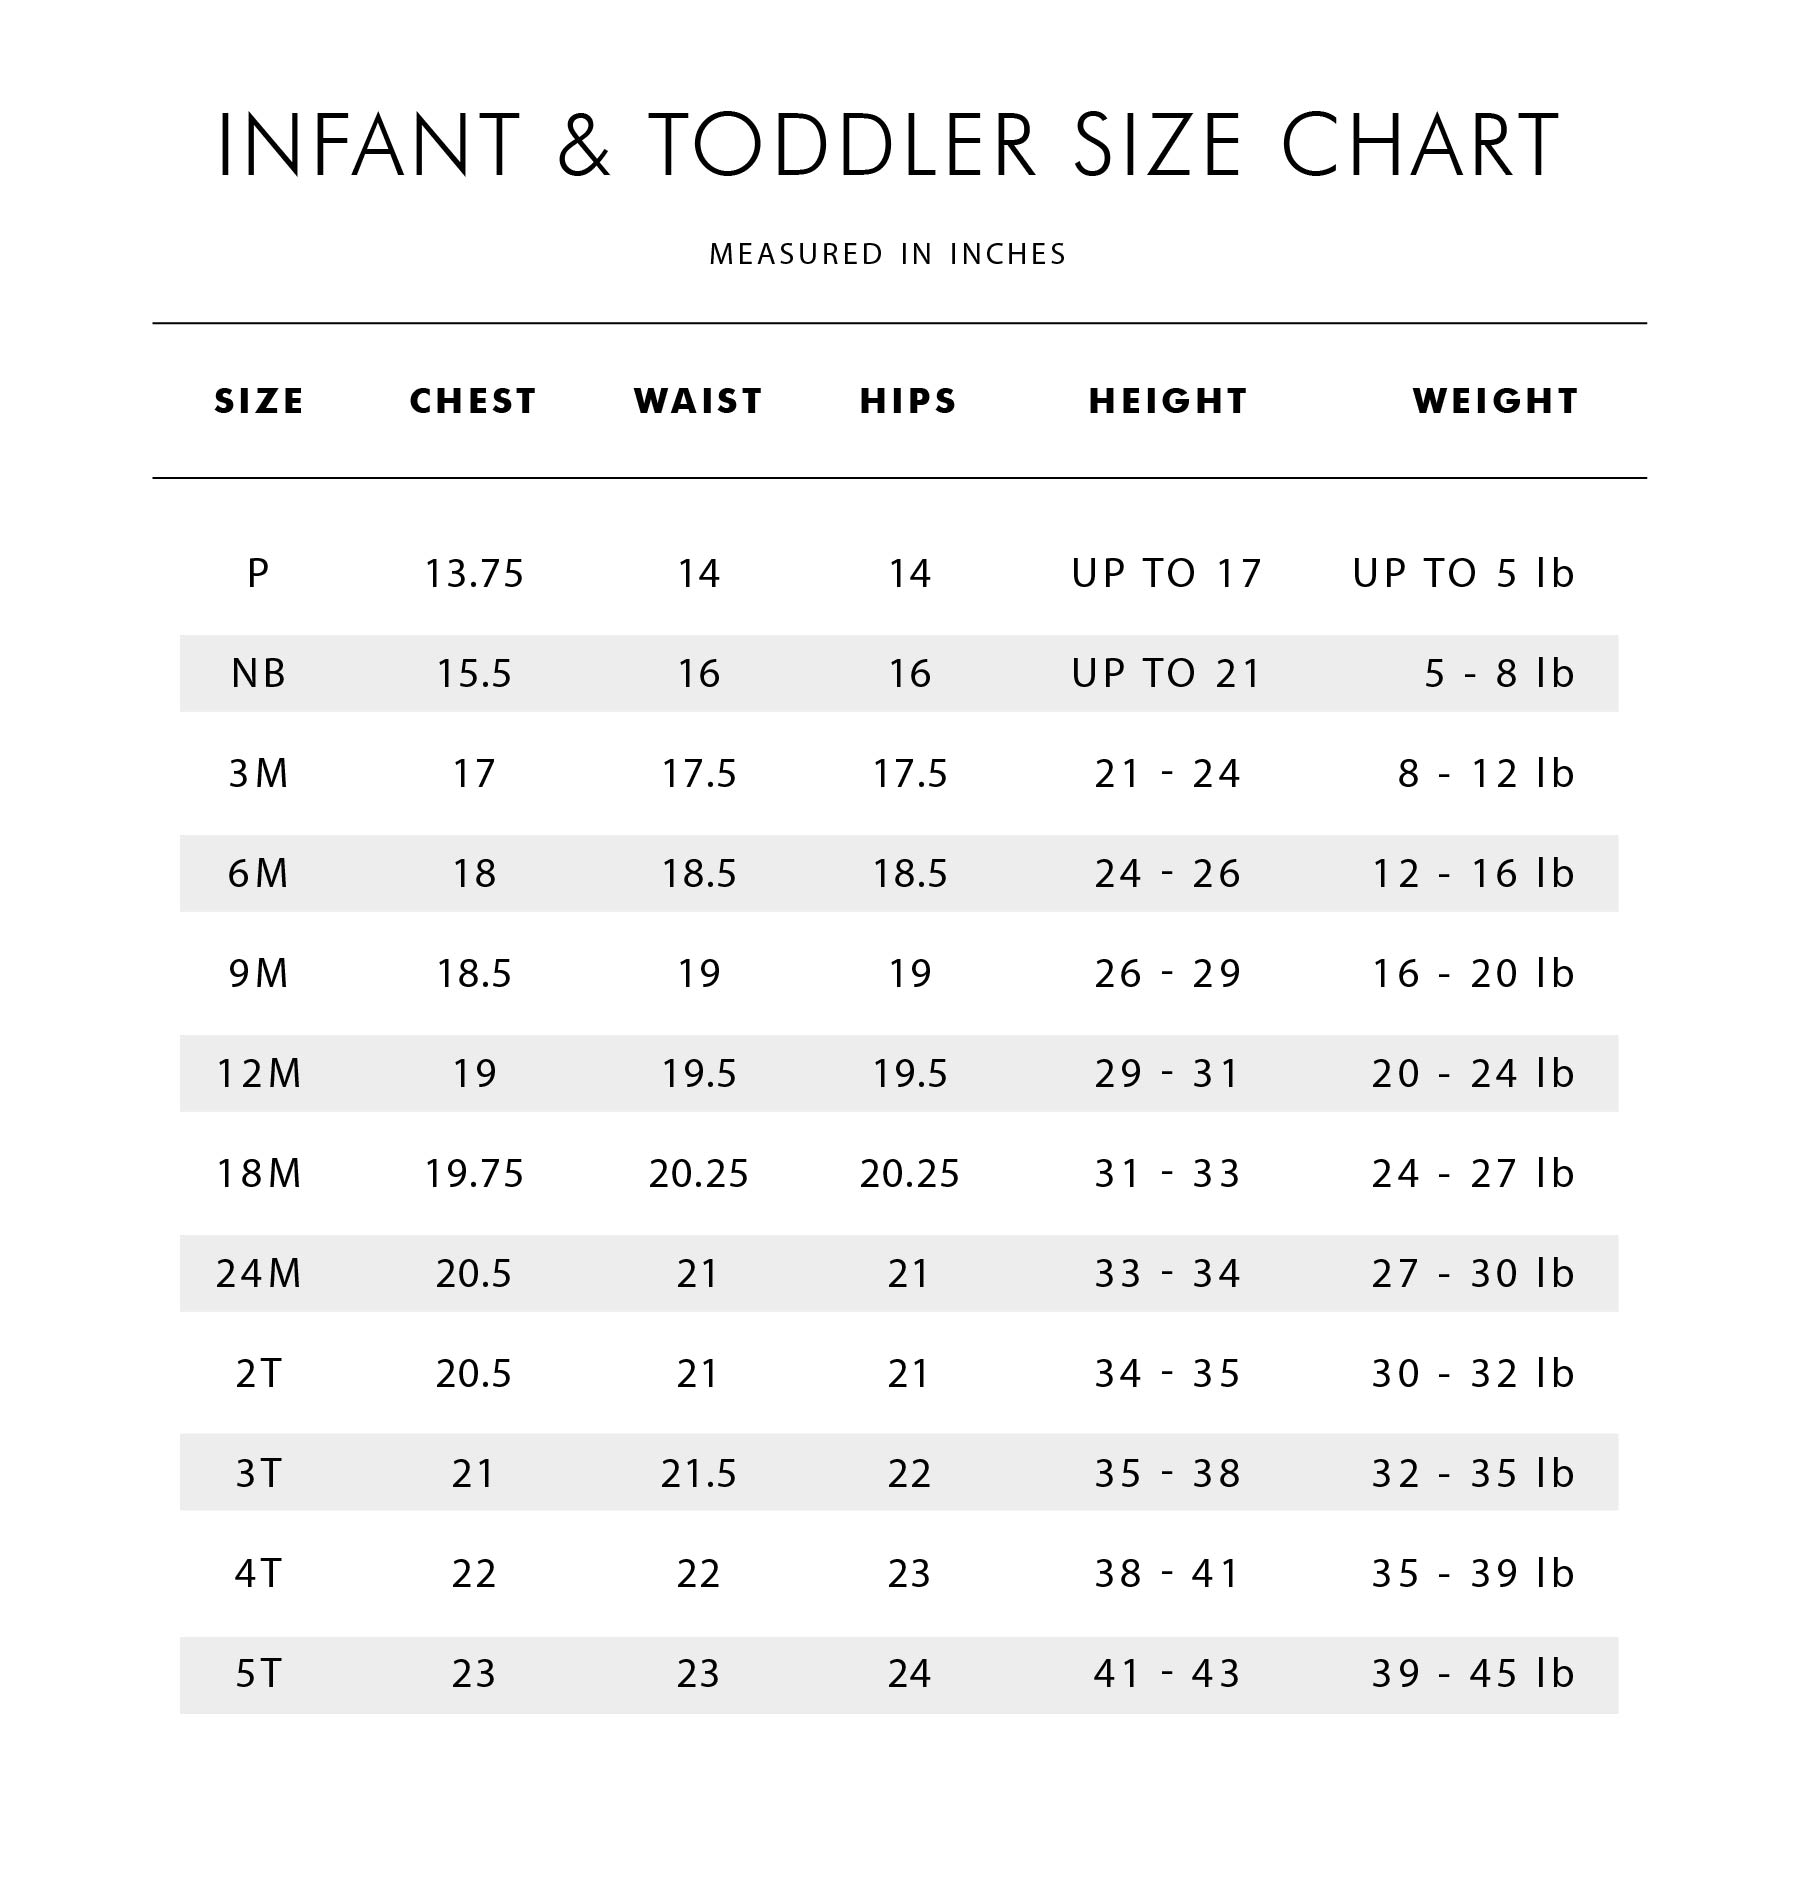 What Is 2t Size Chart